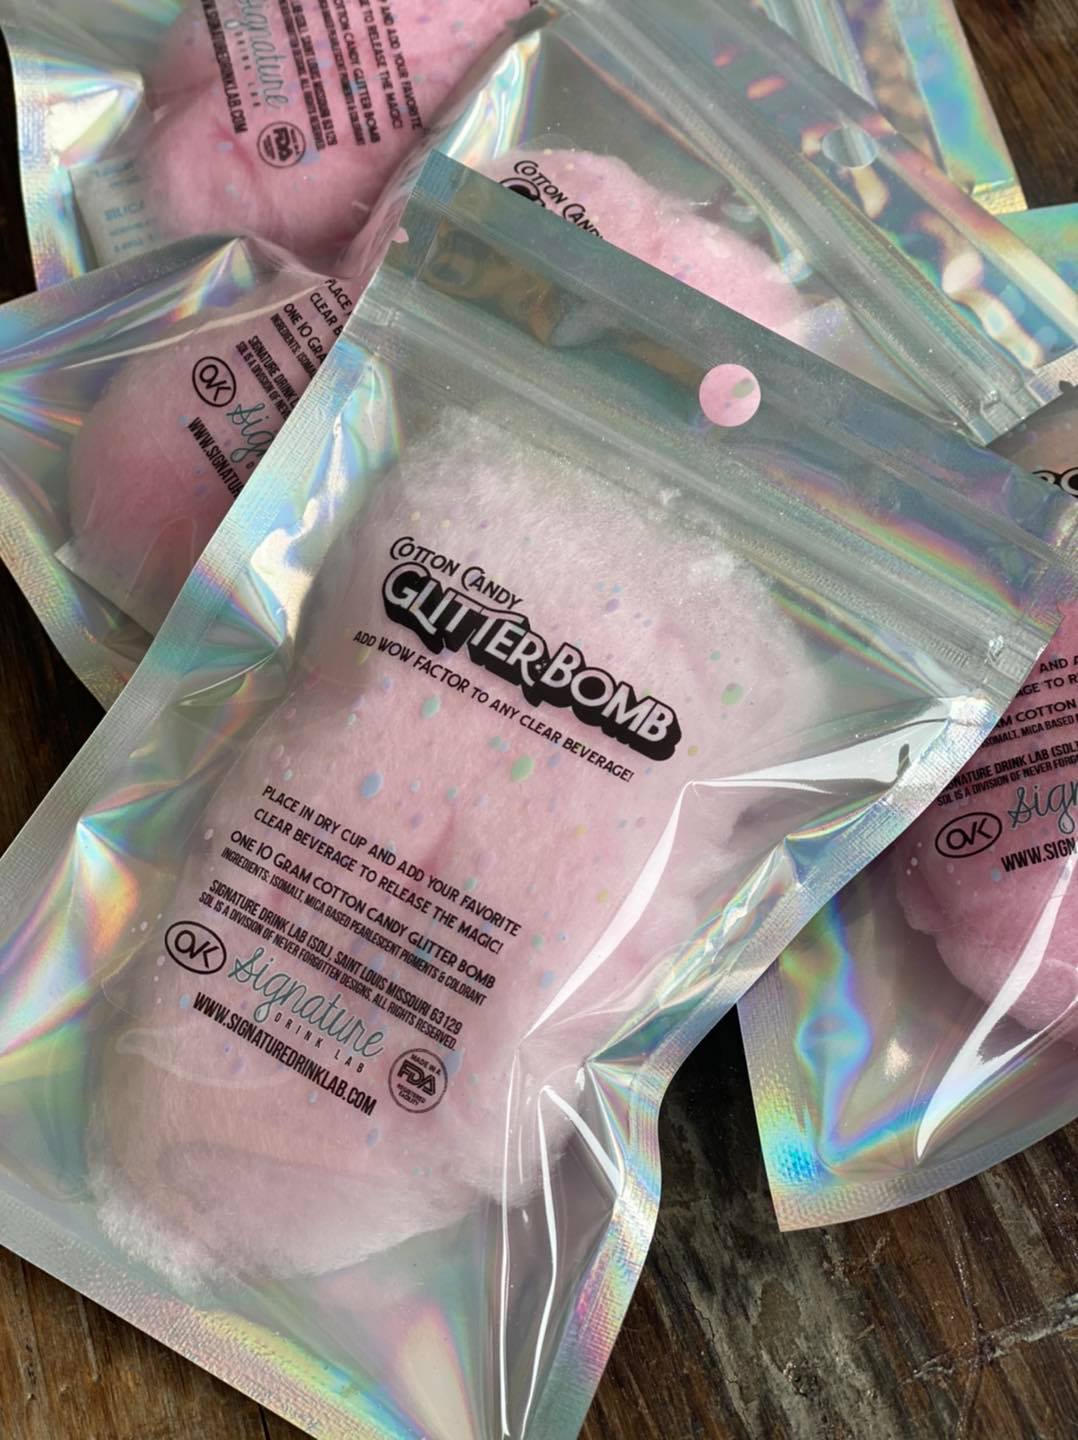 Cotton Candy Glitter Bombs in Holograph Packaging for Drinks – Signature  Drink Lab